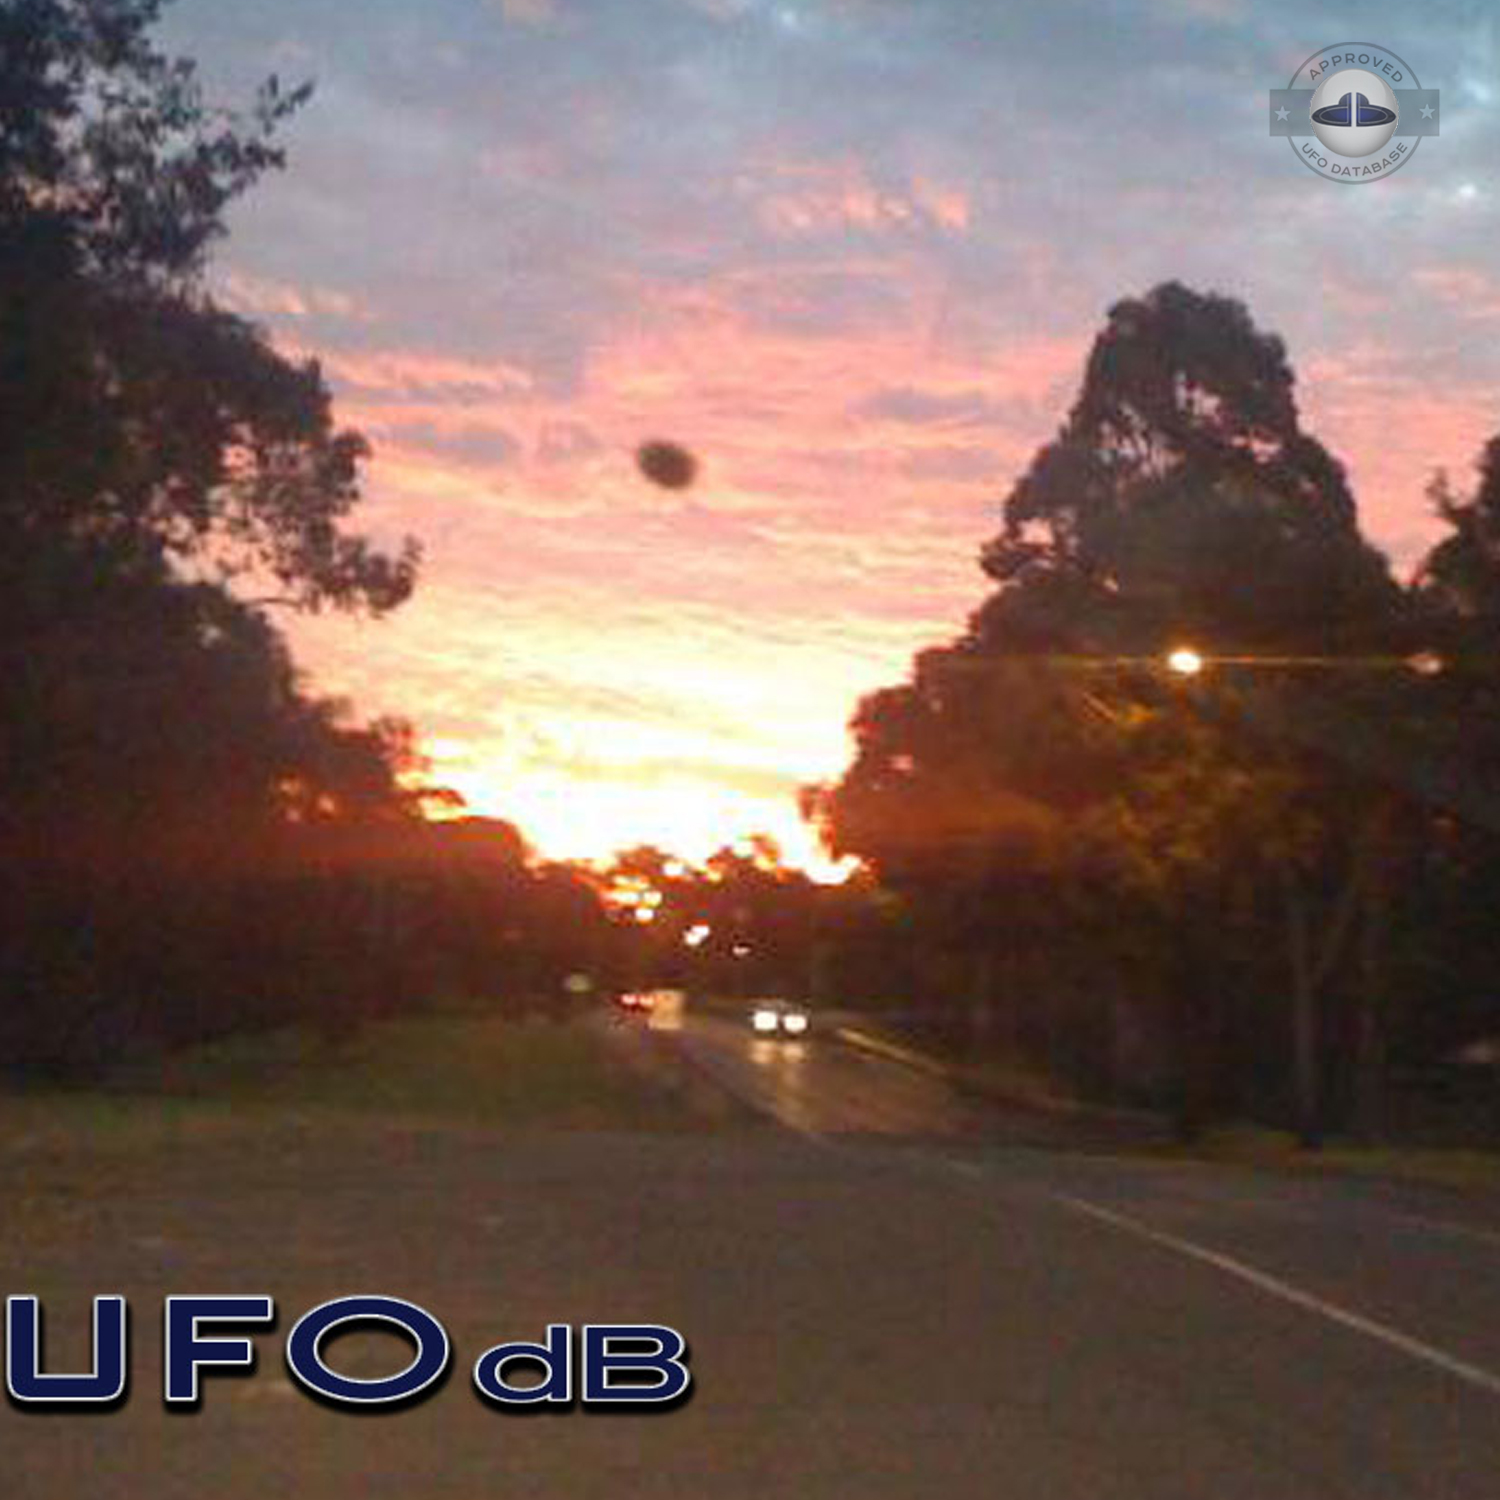 The UFO came out from a light in the cloudy sky during sunset UFO Picture #76-2